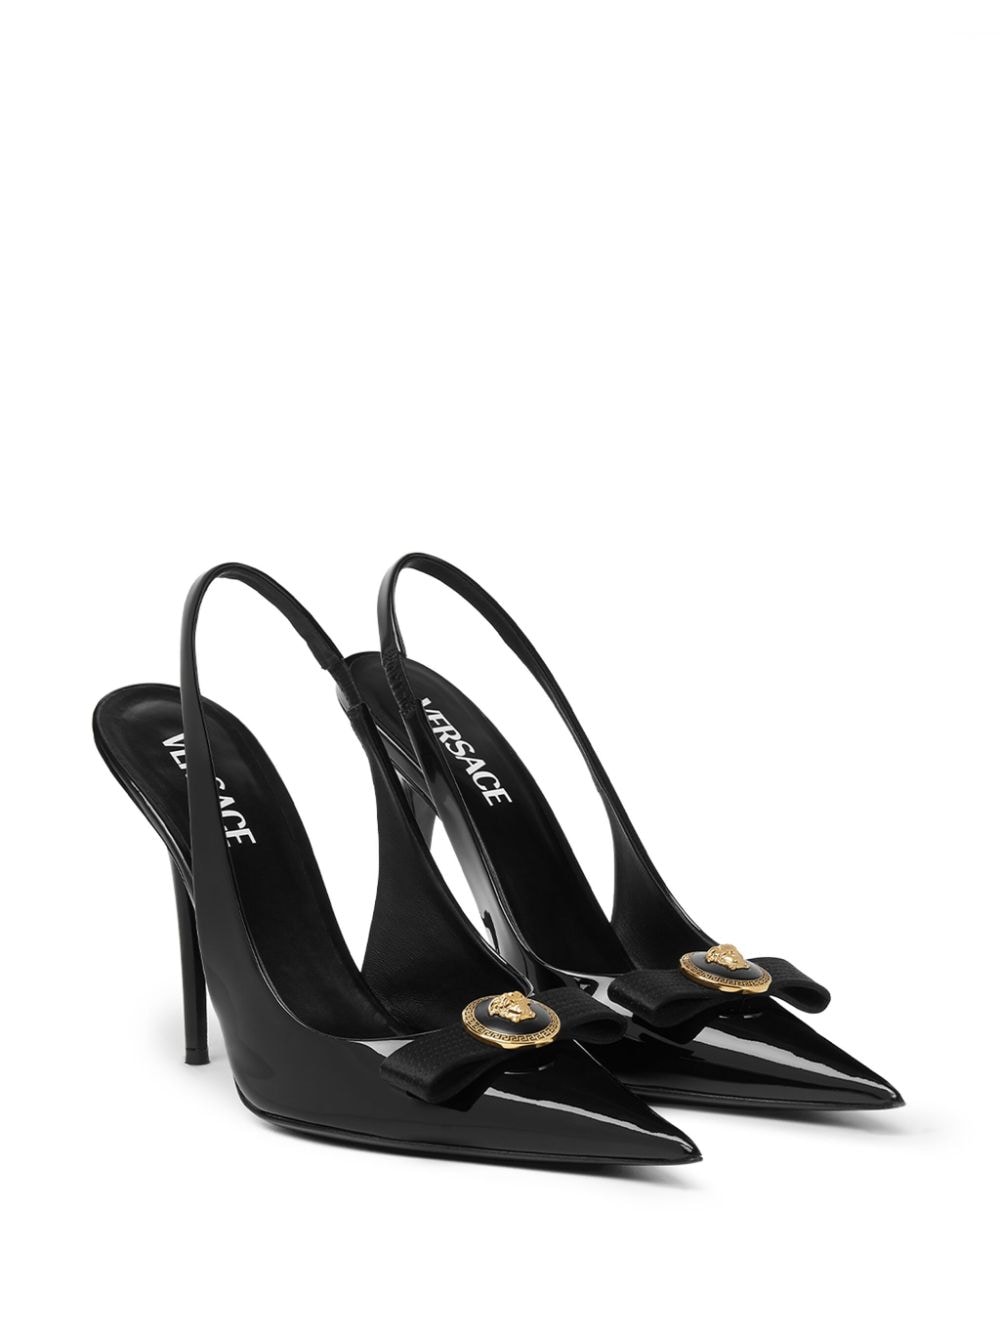 GIANNI 120MM LEATHER PUMPS